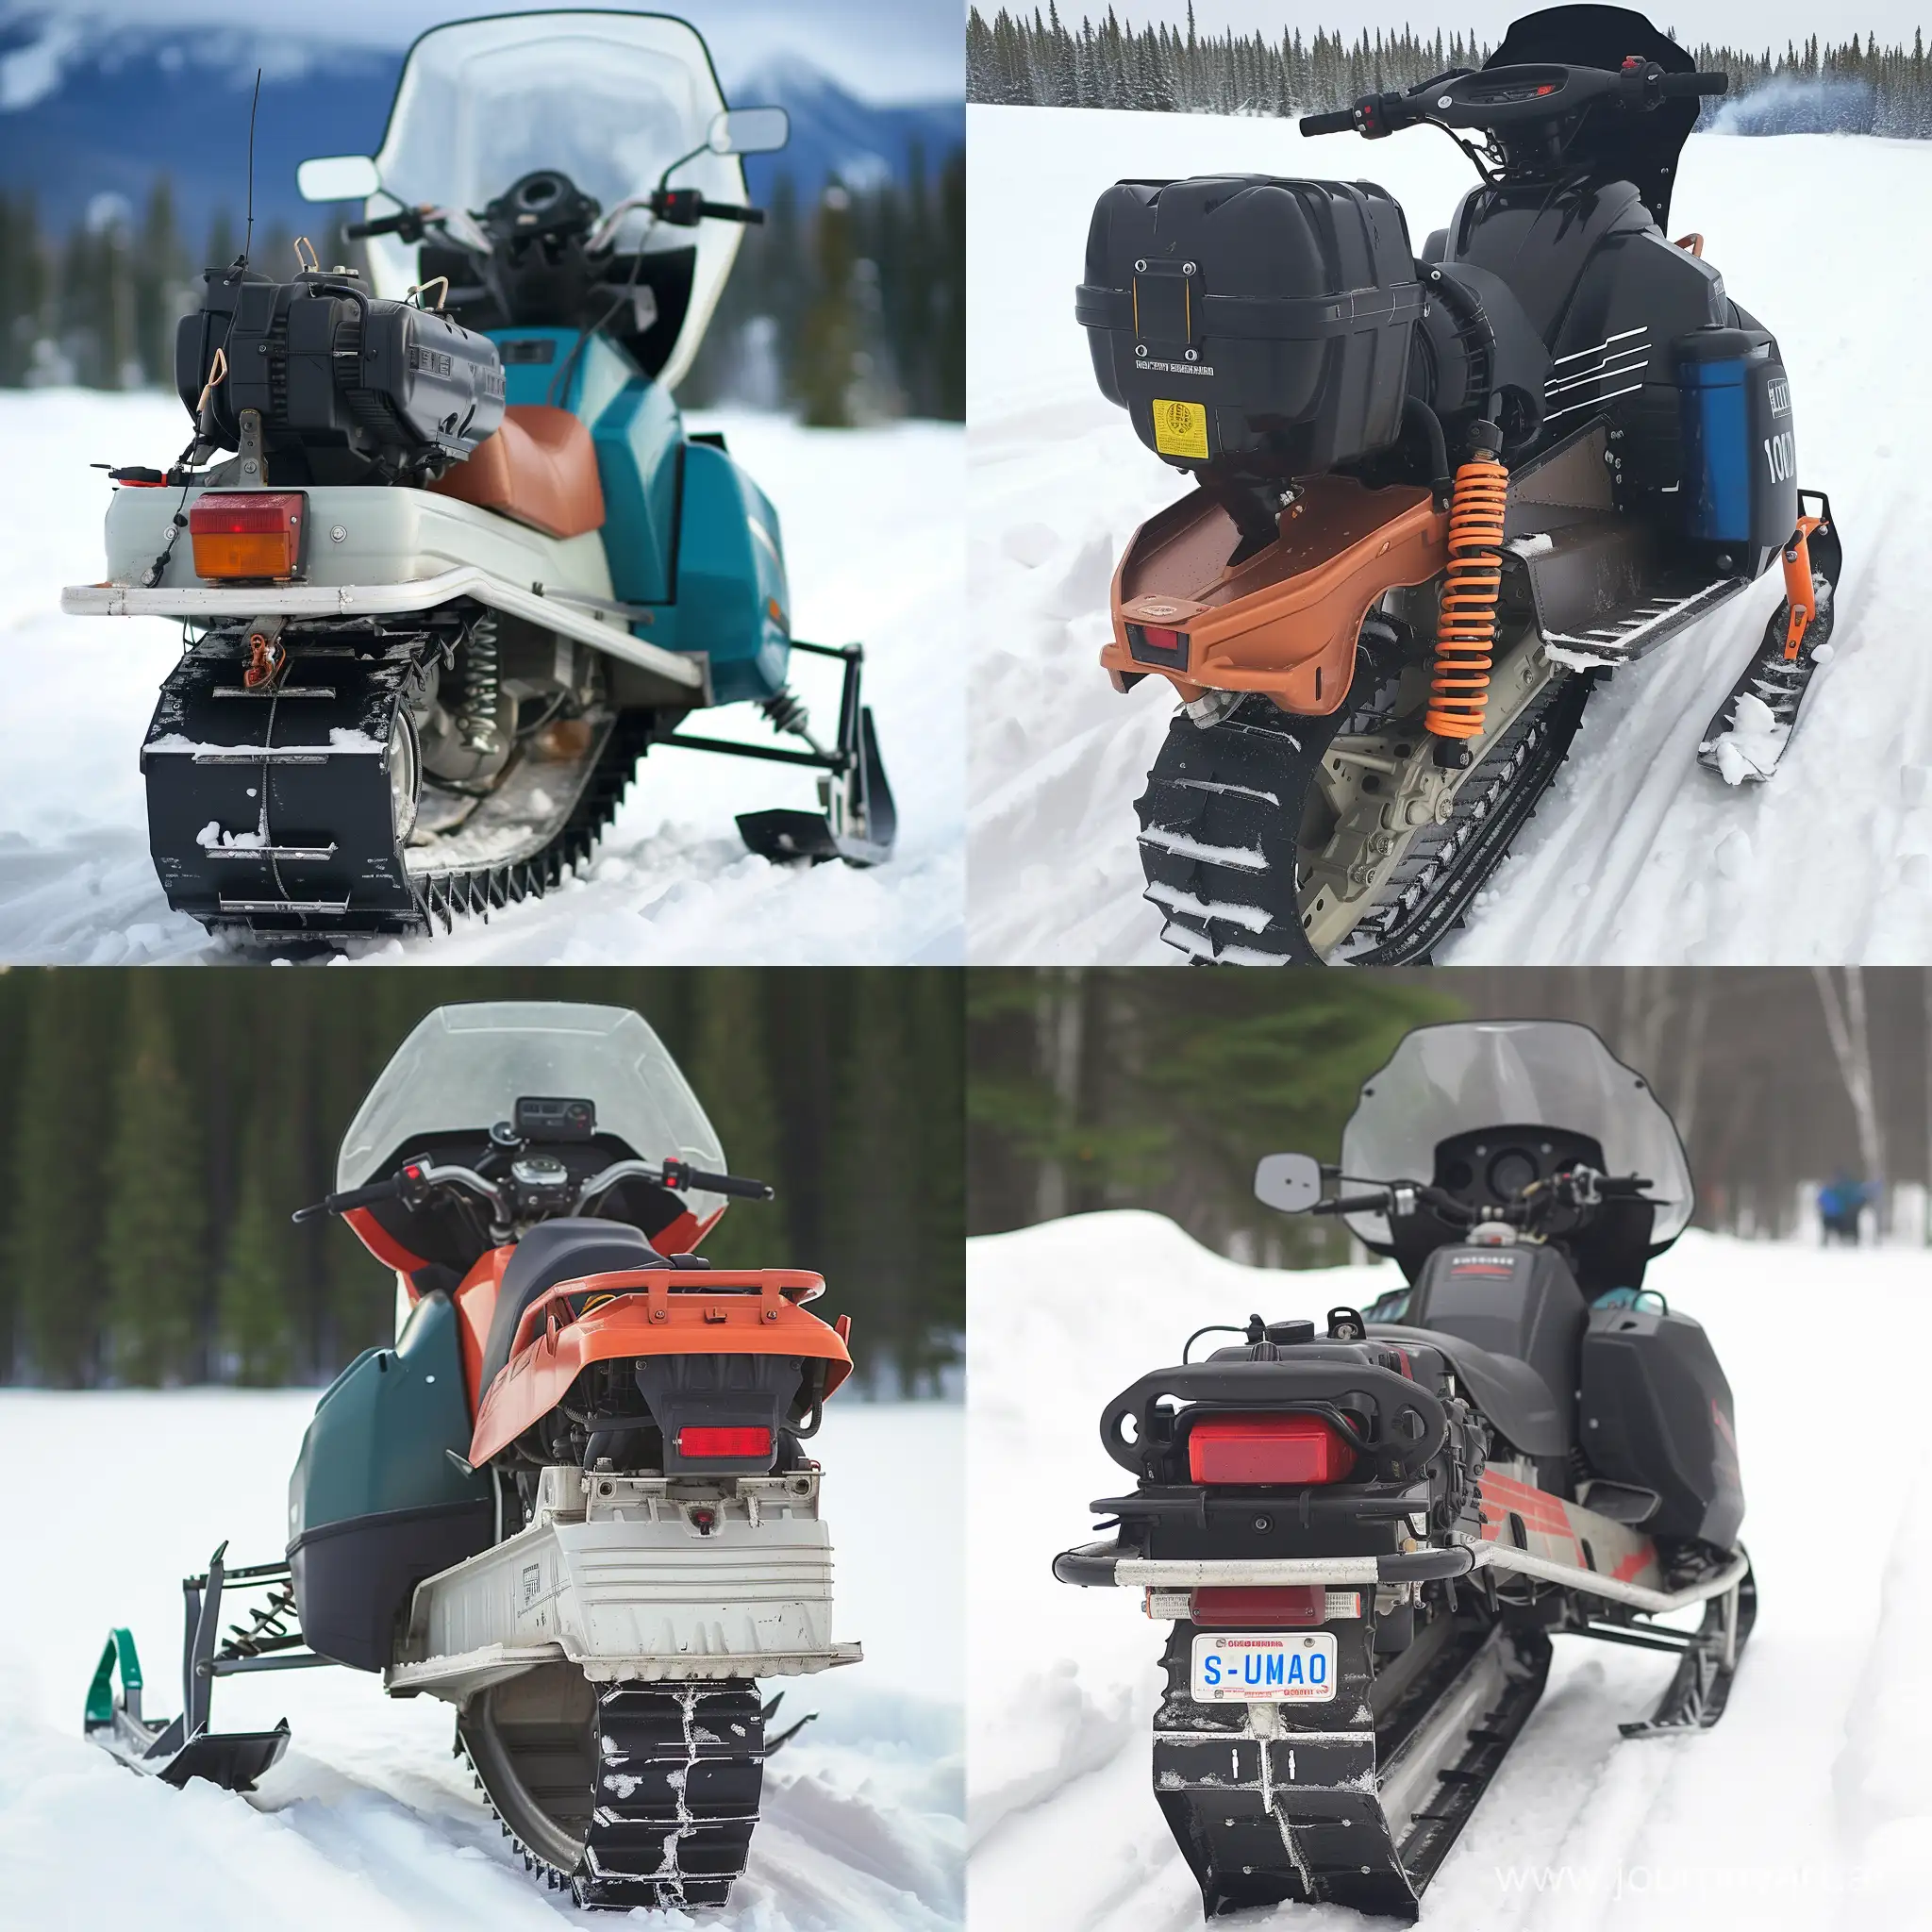 outboard motor on a snowmobile